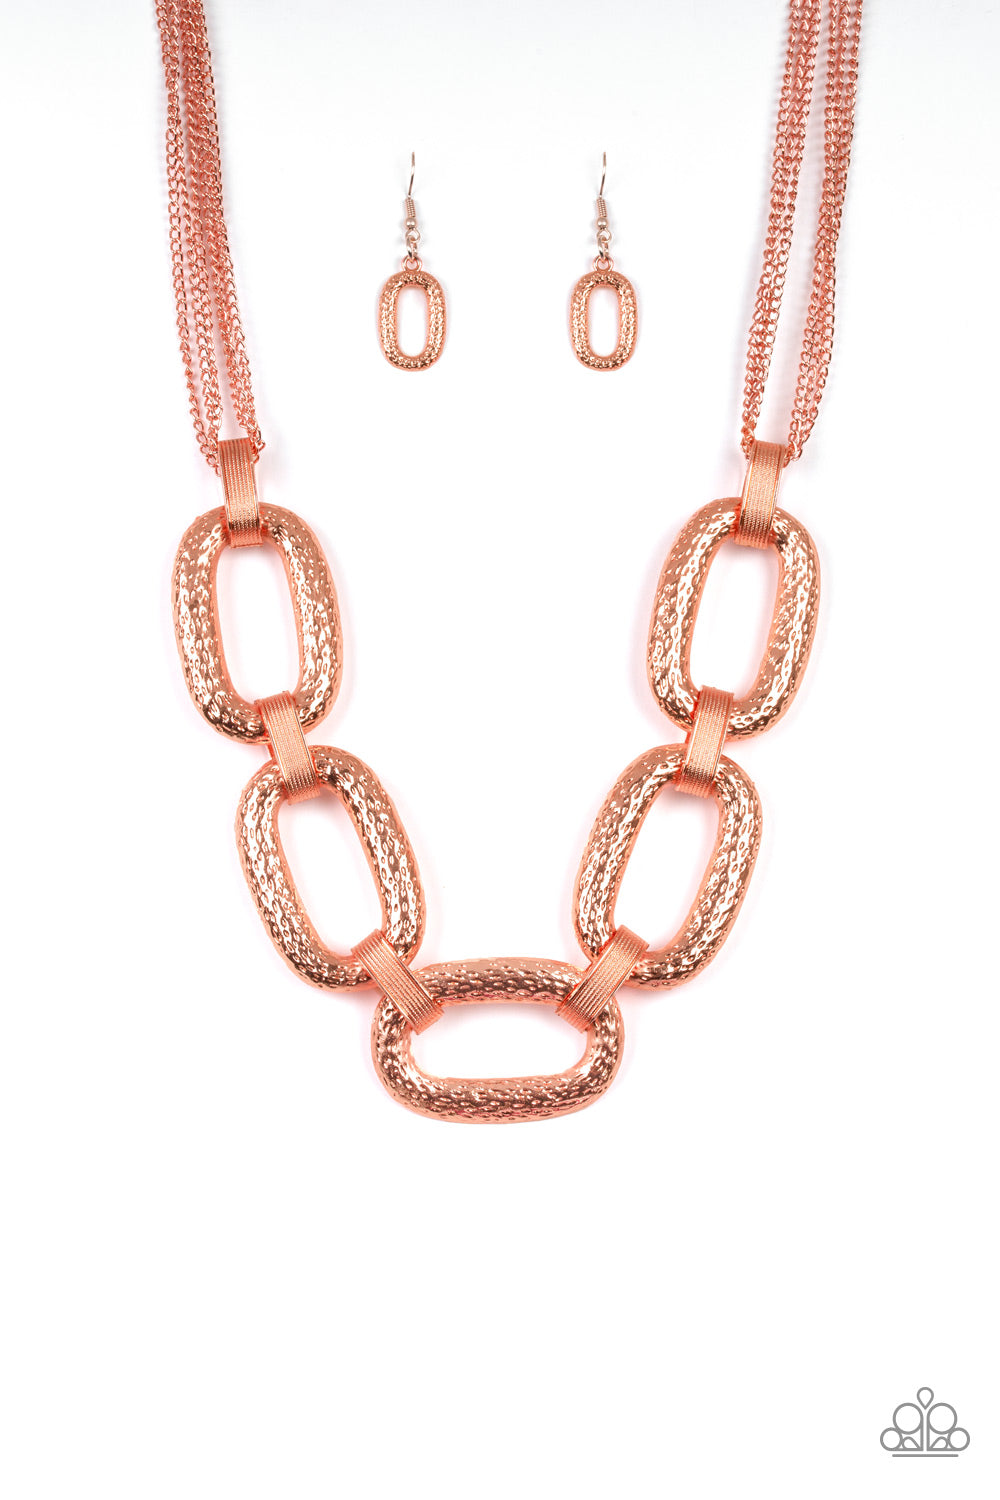 Take Charge - copper - Paparazzi necklace